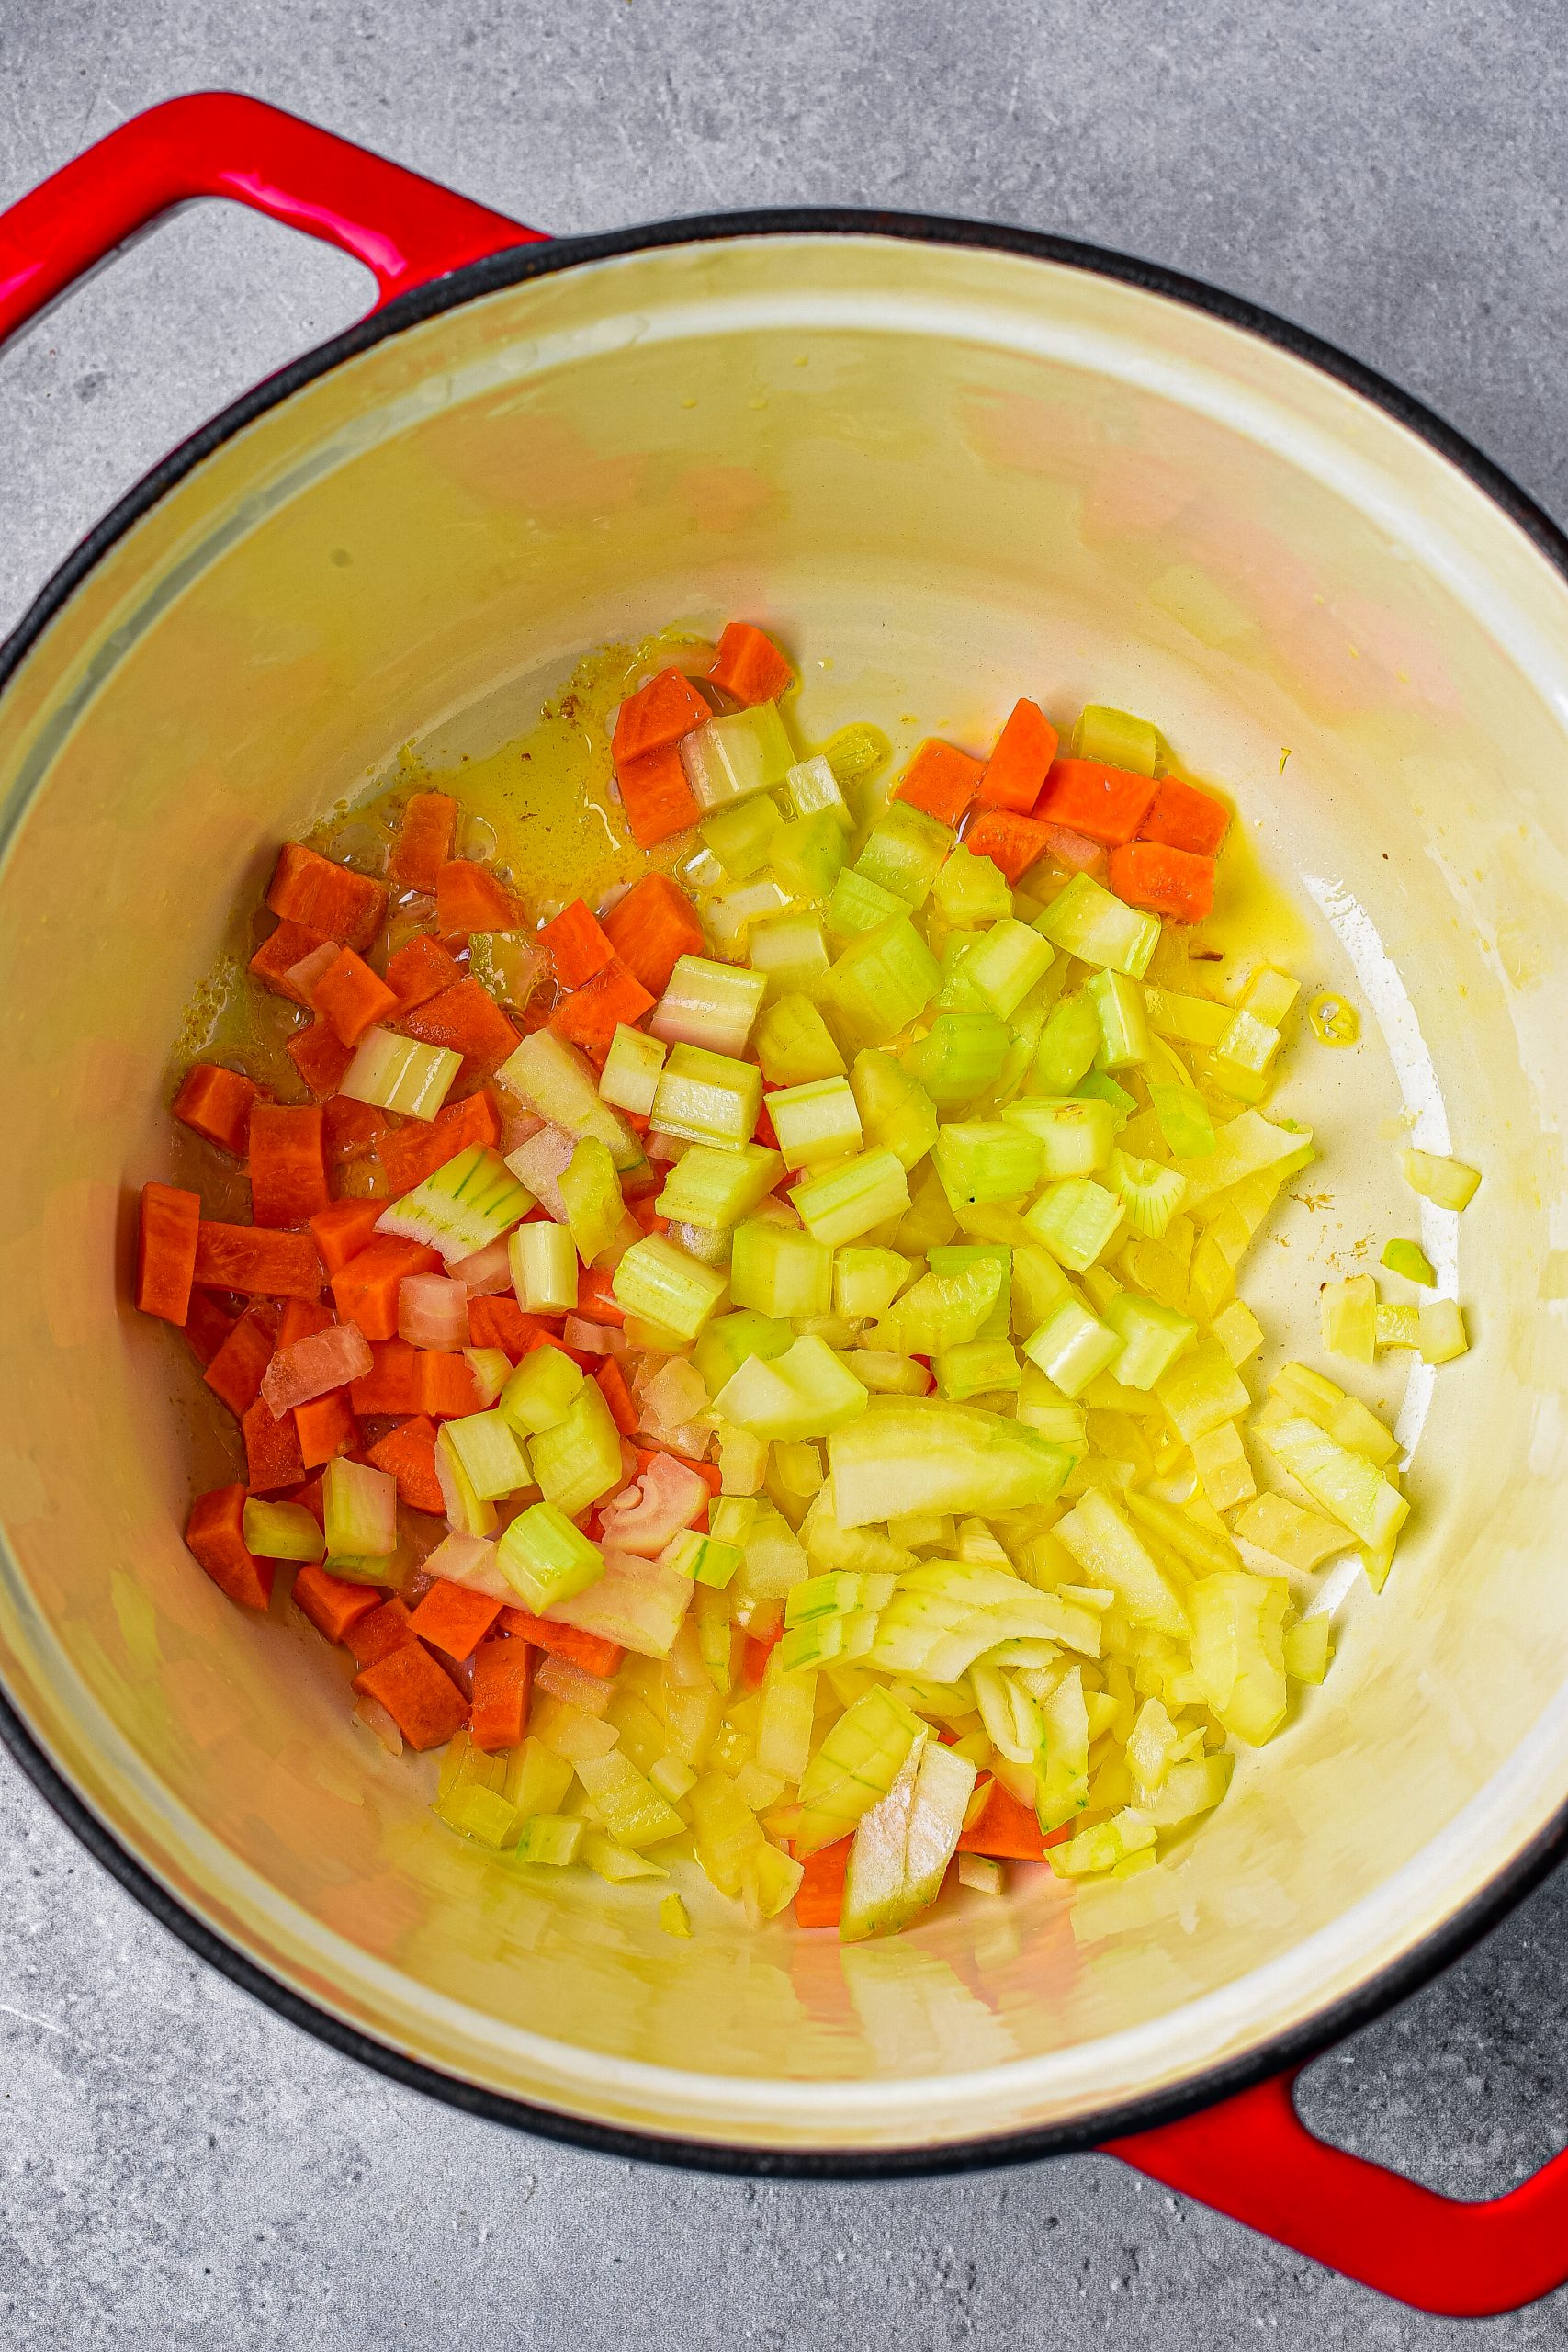  Add 1 Tbsp butter, carrot, celery, and onion to a pot over medium heat, and saute until softened. 